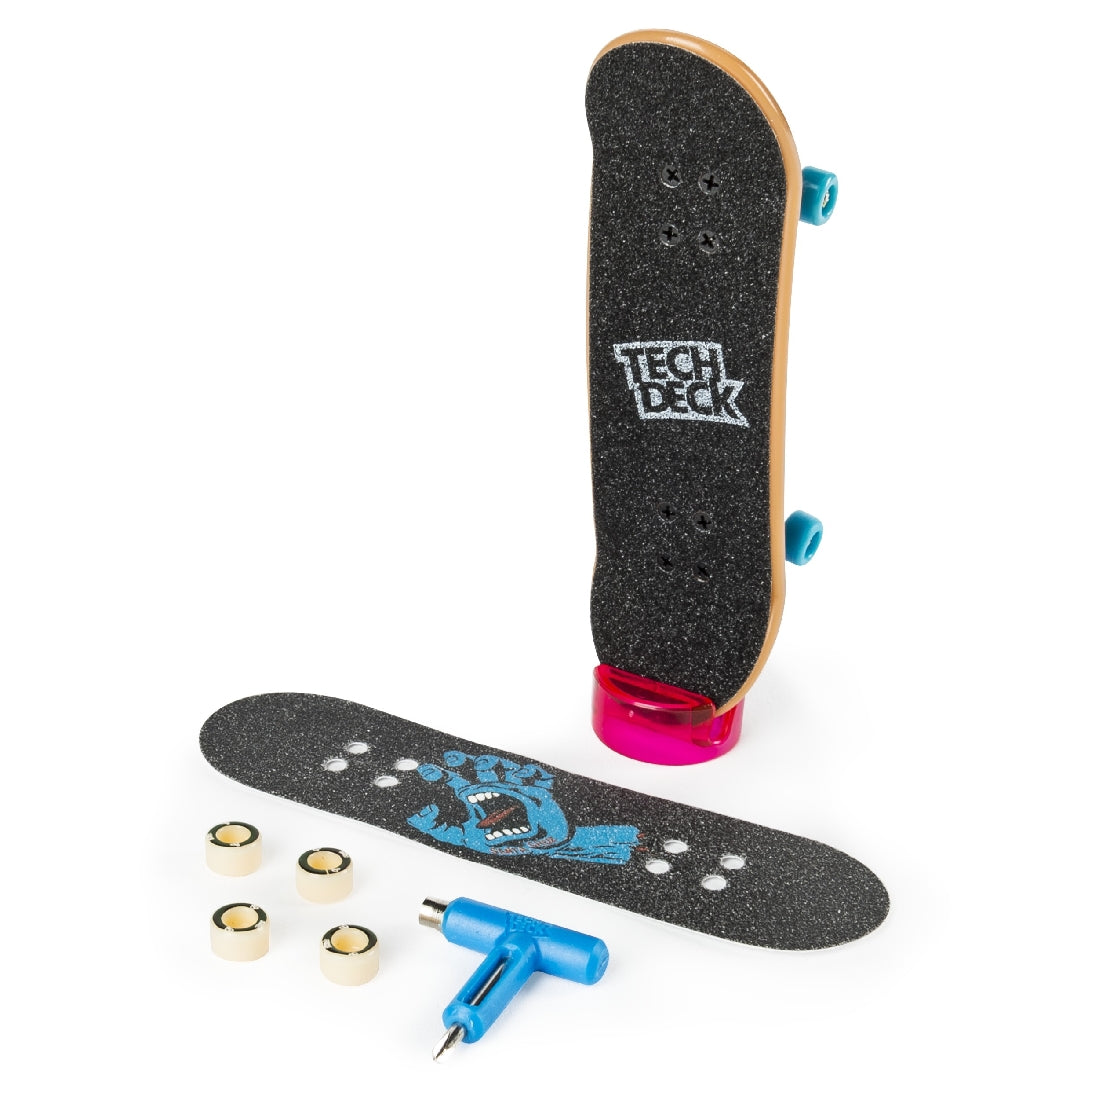 Tech Deck - 96Mm Fingerboard with Authentic Designs, for Ages 6 and up (Styles Vary) Blue